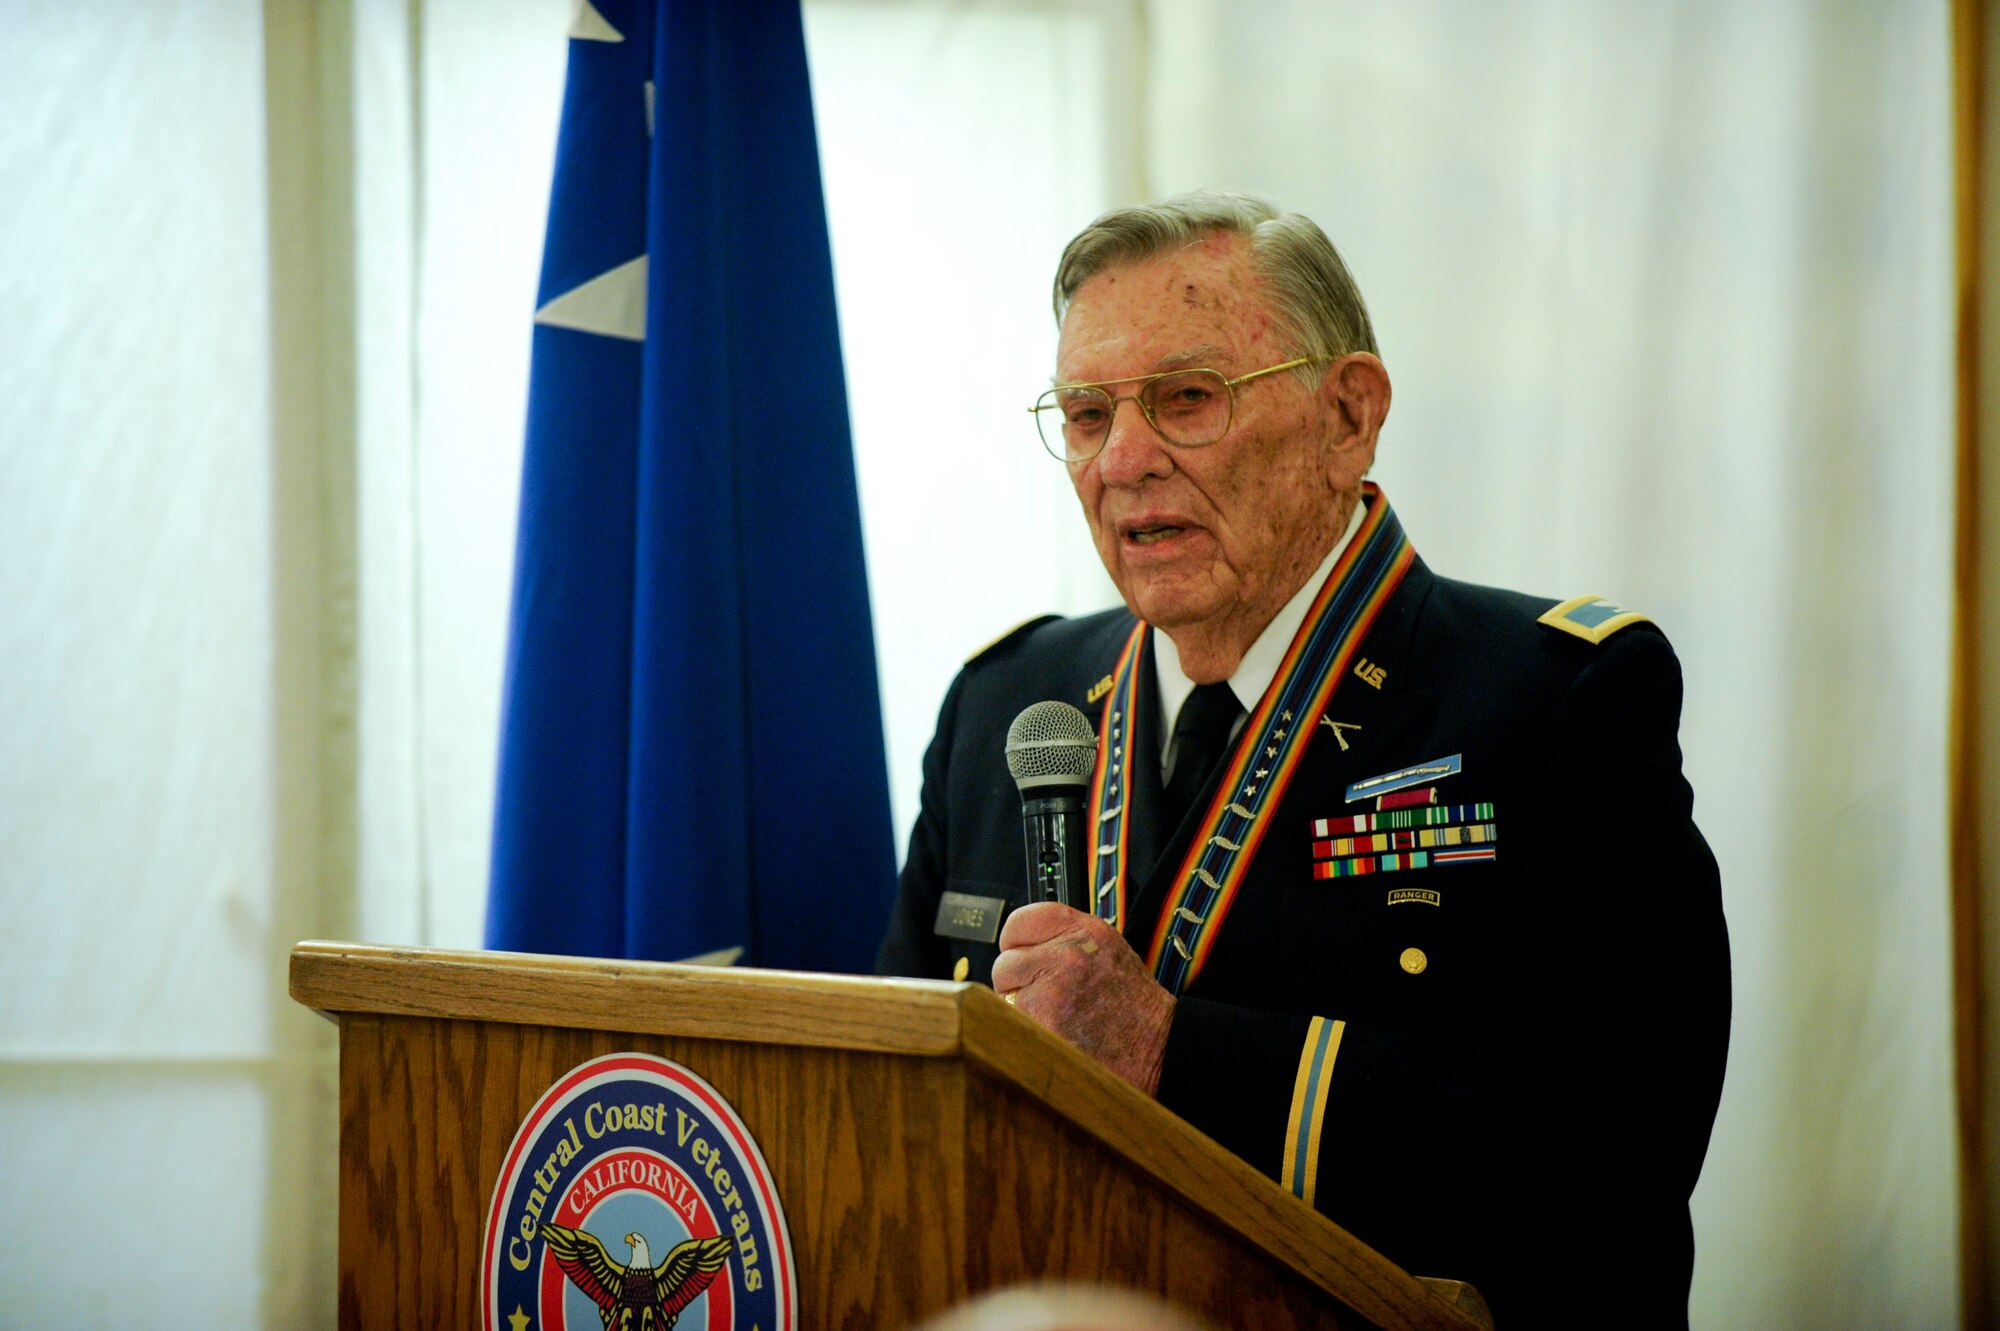 VANDENBERG AIR FORCE BASE, Calif. -- Retired Army Col. Jack Jones, Central Coast Veterans Memorial Museum president, introduces the museum's newest display which includes Gen. Hoyt S. Vandenberg's uniform, his medals and other memorabilia at the museum in San Luis Obispo, Calif., Tuesday, Nov. 8, 2011. Maj. Gen. Hoyt S. Vandenberg Jr. donated his father's uniform items to the Vandenberg chapter of the Military Order of World War who then loaned the items to the museum for permanent display. Gen. Vandenberg was the Air Force's second Chief of Staff, is known for officially authorizing the Air Force's blue service dress and has Vandenberg Air Force Base named after him. (U.S. Air Force photo/Staff Sgt. Levi Riendeau)
